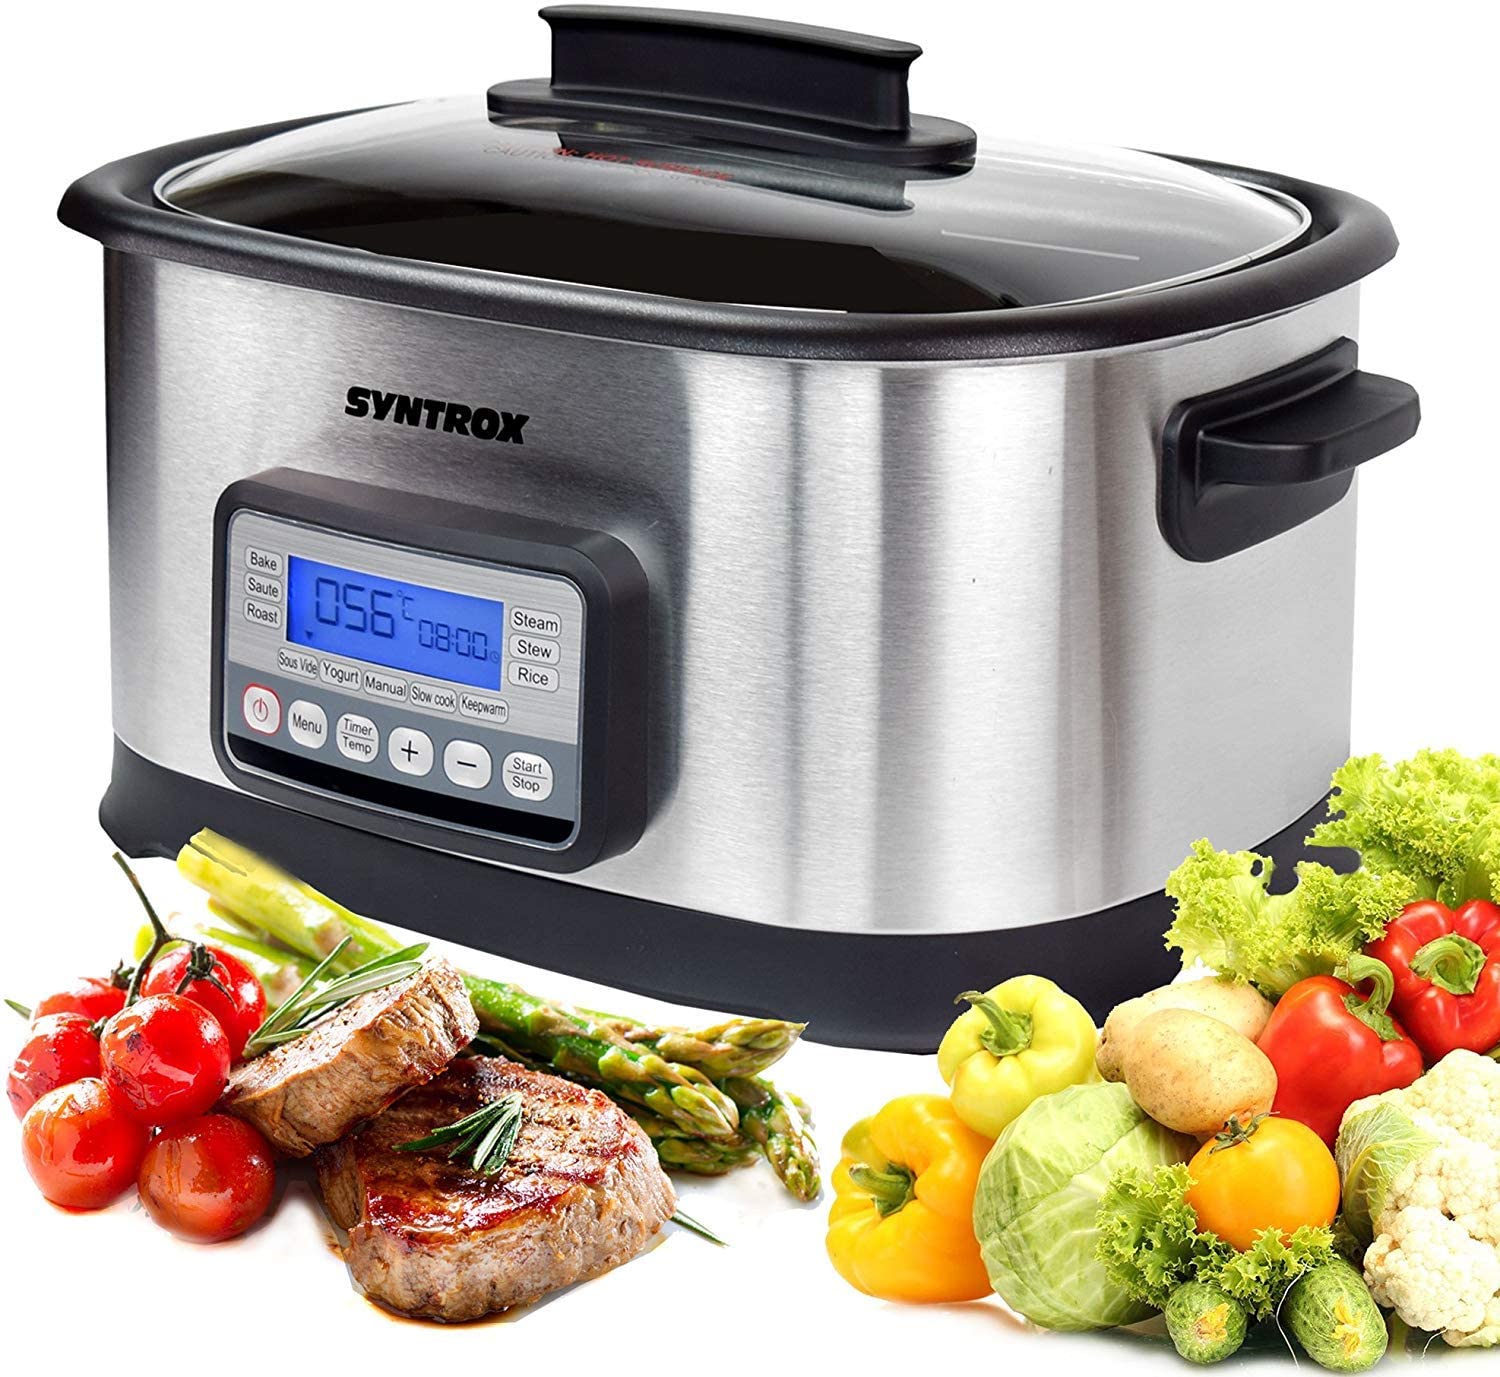 Syntrox Germany 16 in 1 Sous Vide Stove Multi-Purpose Cooker Low Temperature Vacuum Cooker Slow Cooker